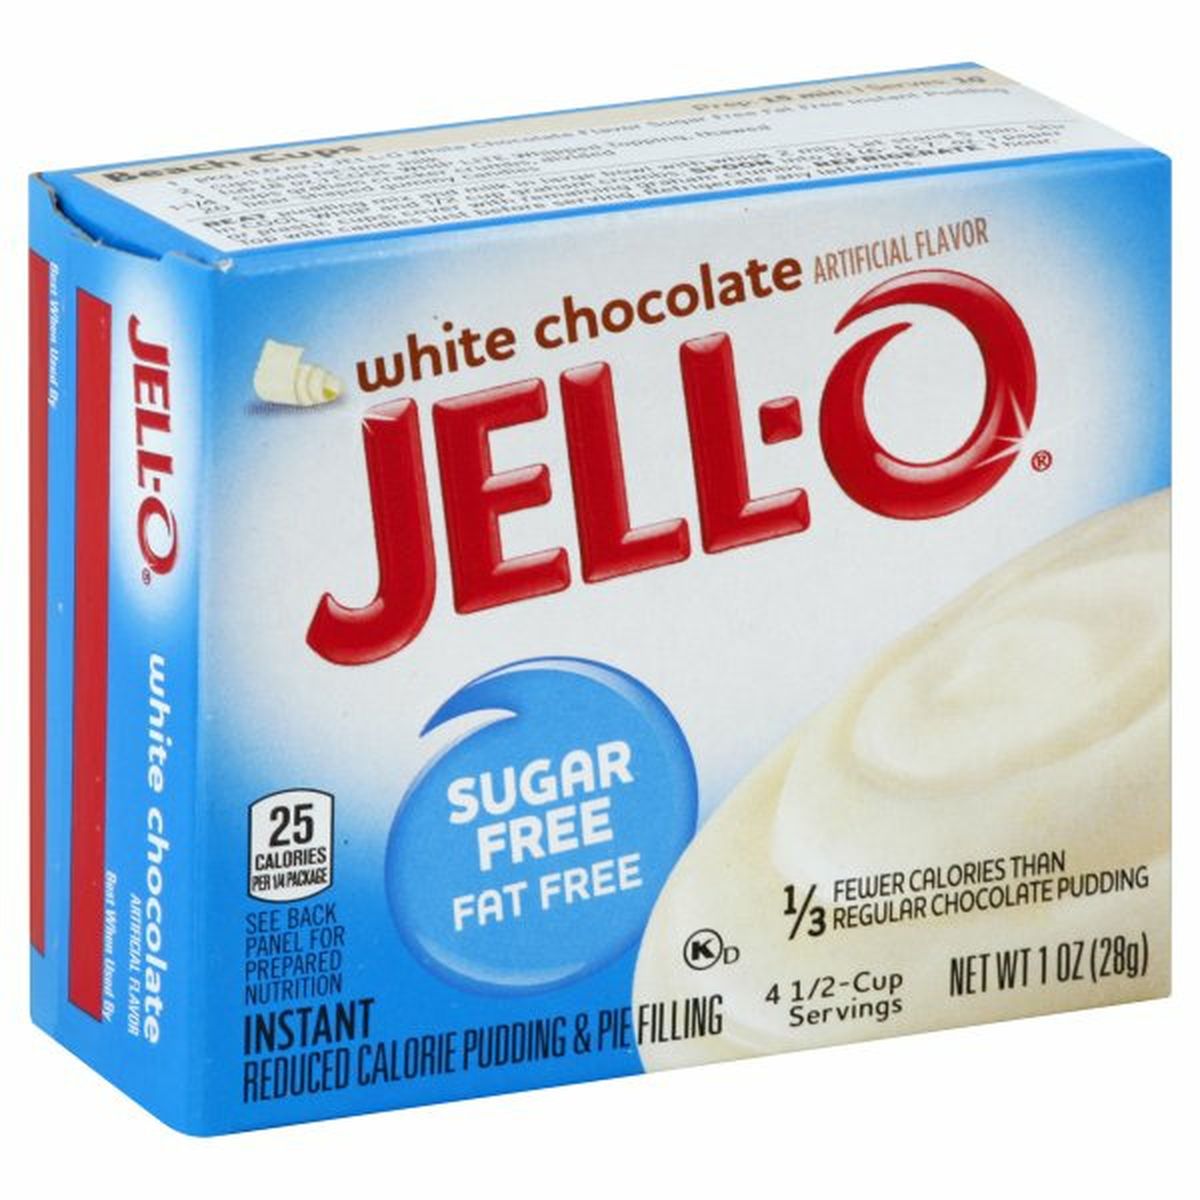 Calories in Jell-O White Chocolate Sugar-Free-Fat-Free Instant Pudding & Pie Filling